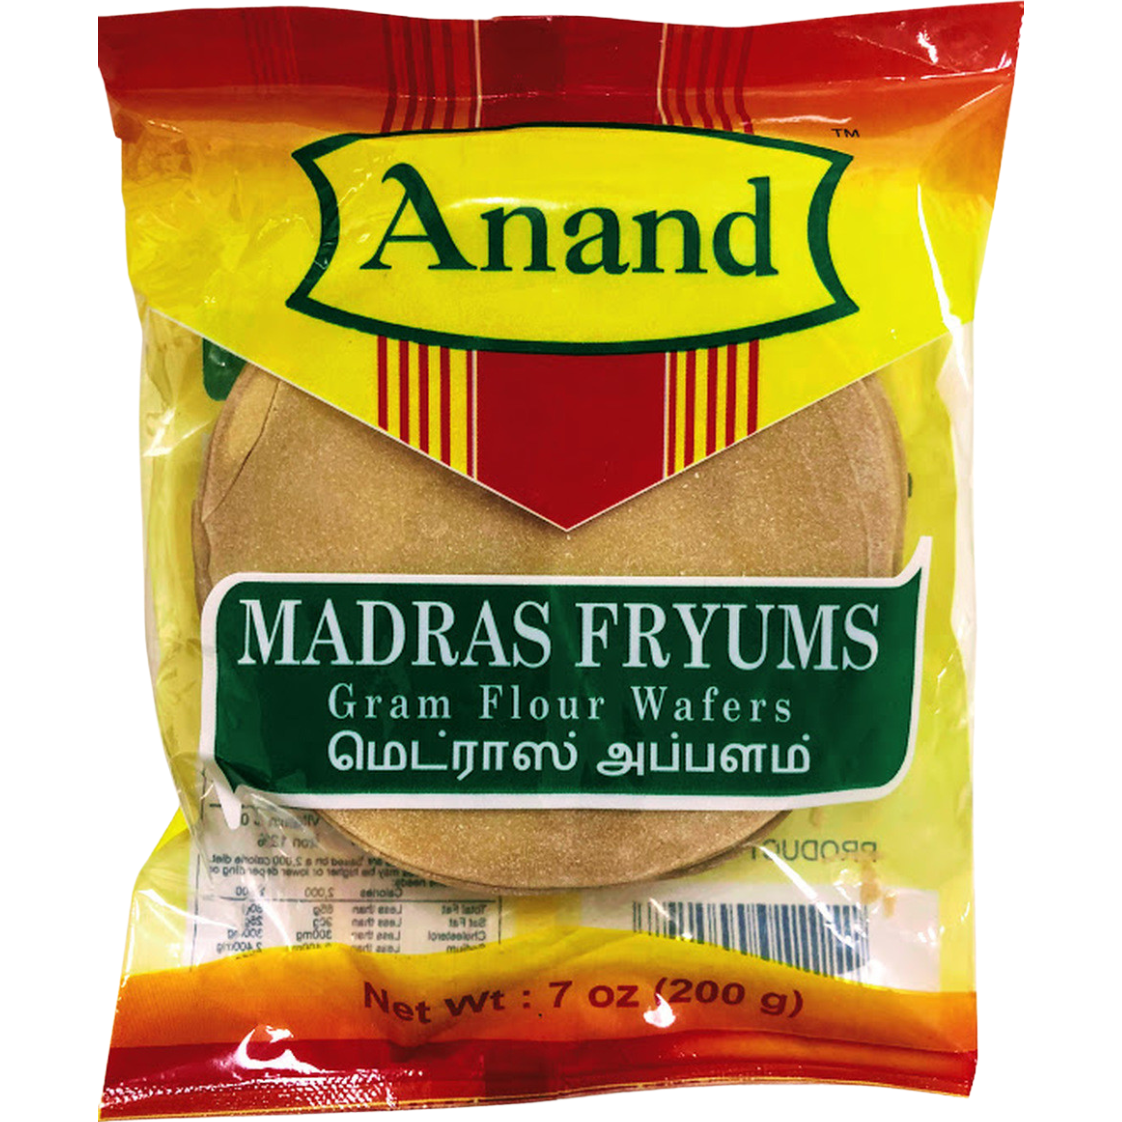 Pack of 5 - Anand Madras Fryums - 200 Gm (7 Oz)